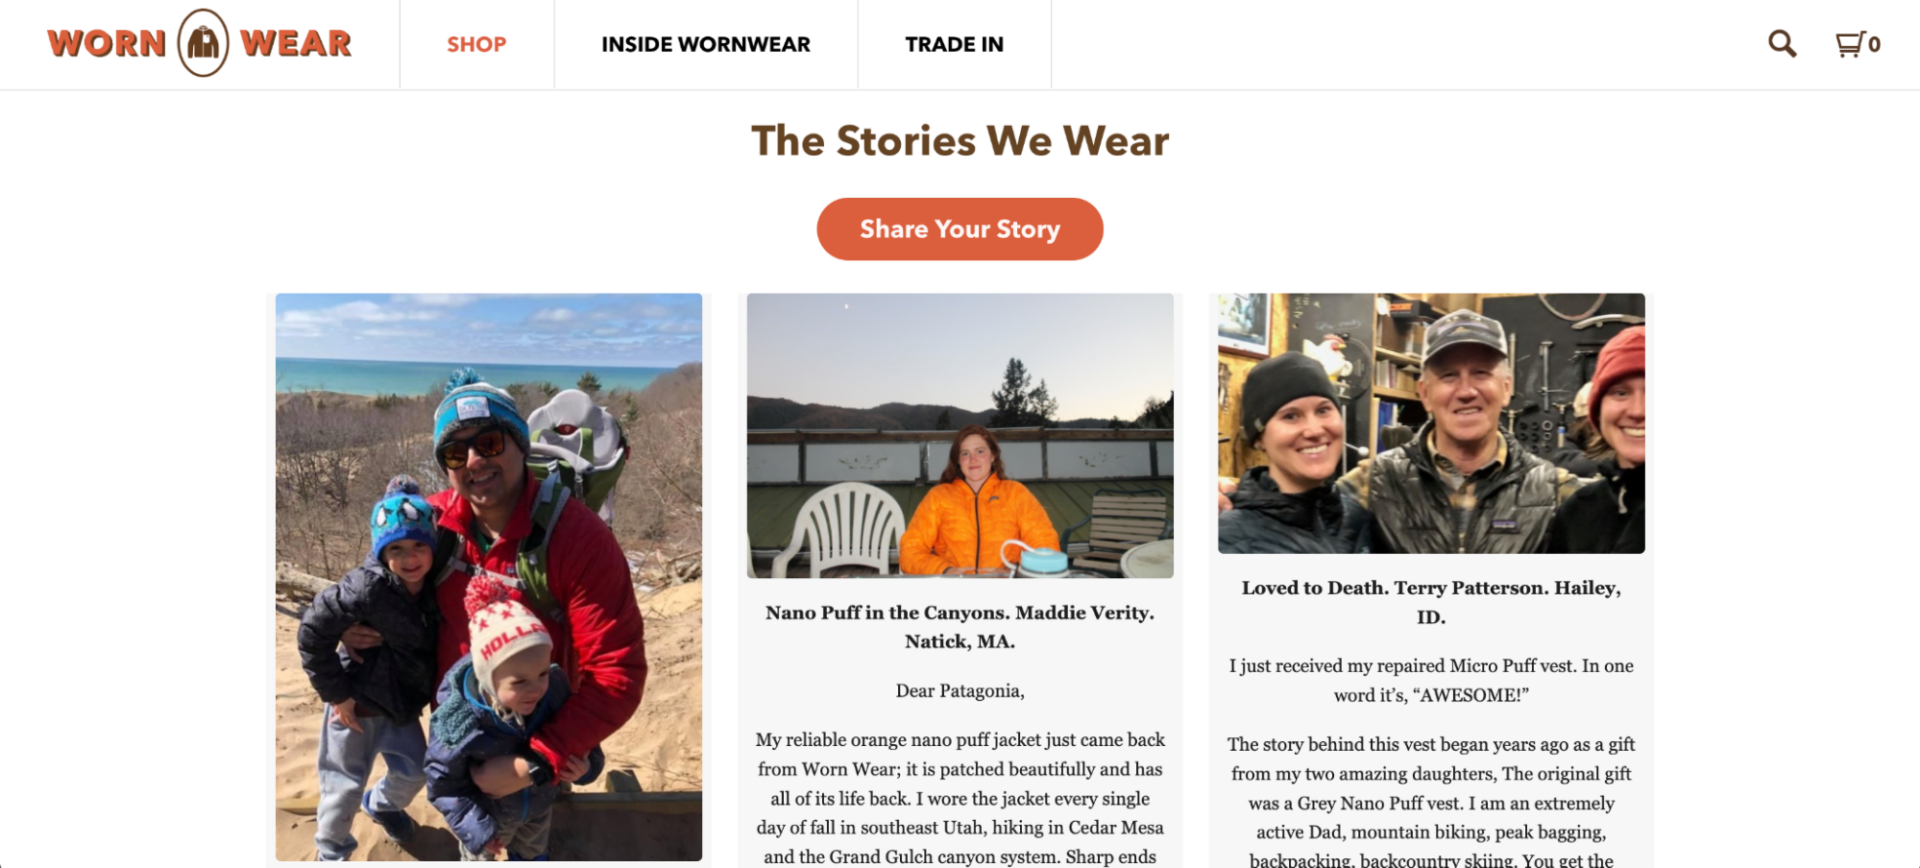 Patagonia is known for their product quality and durability. To reinforce their sustainability mission, the brand has a designated hub where they share stories from customers.